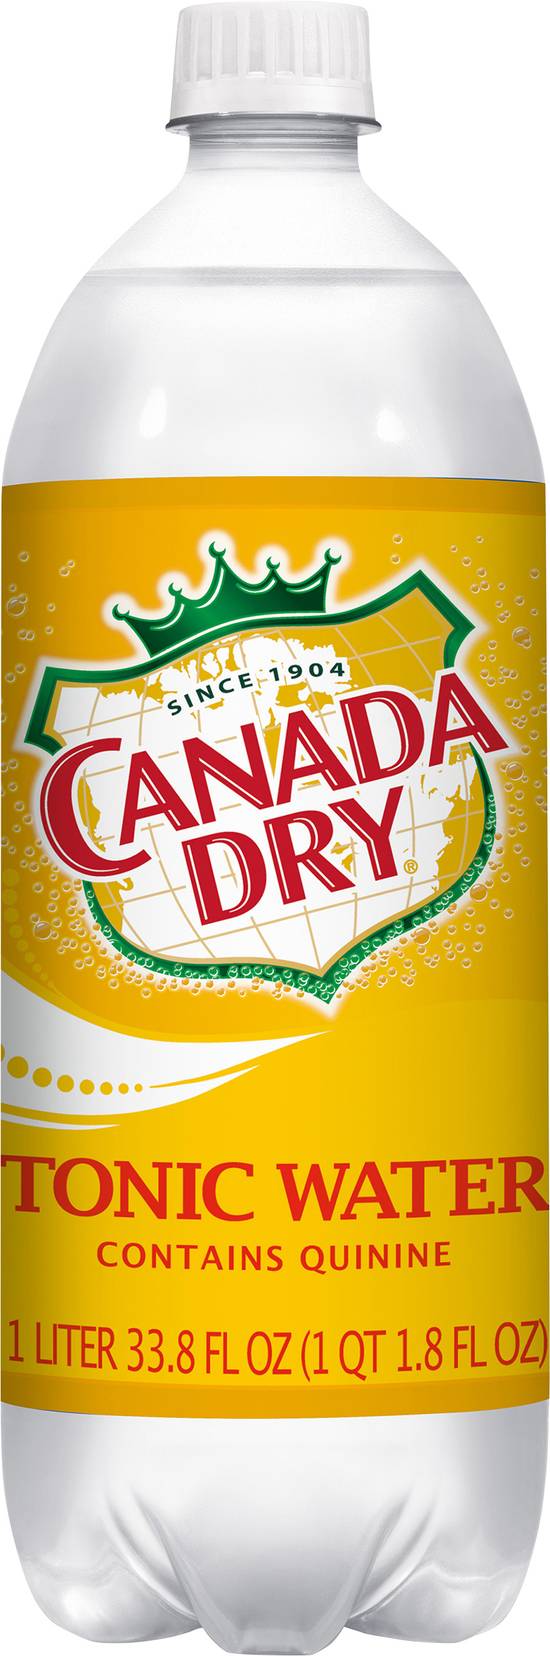 Canada Dry Tonic Water Contains Quninine (33.8 fl oz)